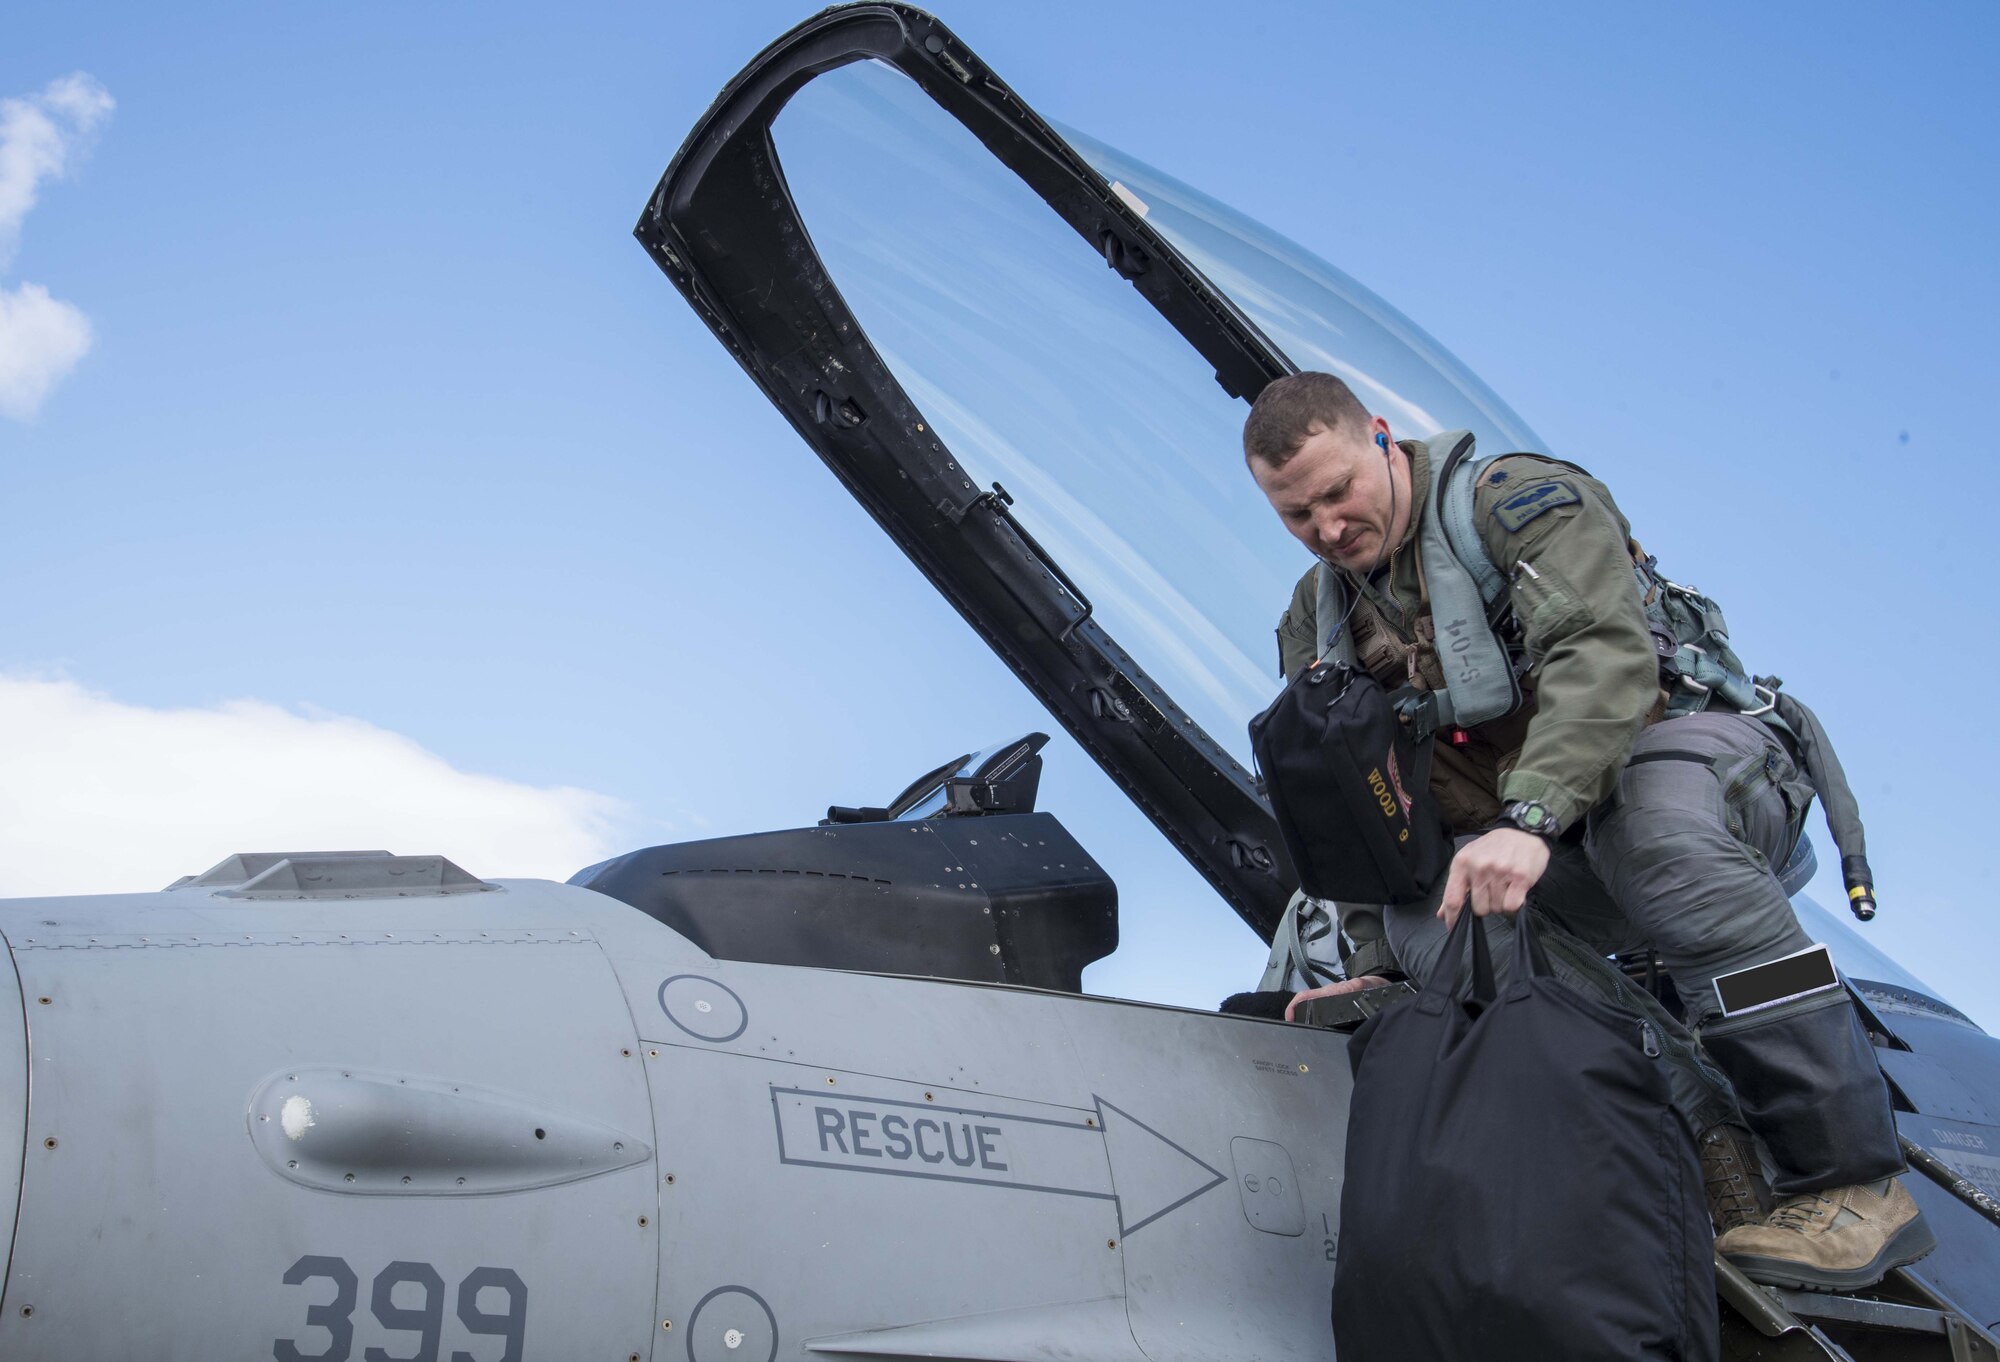 U.S. Air Force Lt. Col. Paul Miller, the deputy commander of the 35th Operations Group, climbs into an F-16 Fighting Falcon during exercise Beverly Sunrise 16-03 at Misawa Air Base, Japan, March 23, 2016. As part of phase II of the operational readiness exercise, Misawa AB simulated a deployment to Kadena Air Base, Japan, during which they conducted contingency operations. (U.S. Air Force photo by Airman 1st Class Jordyn Fetter/Released) 